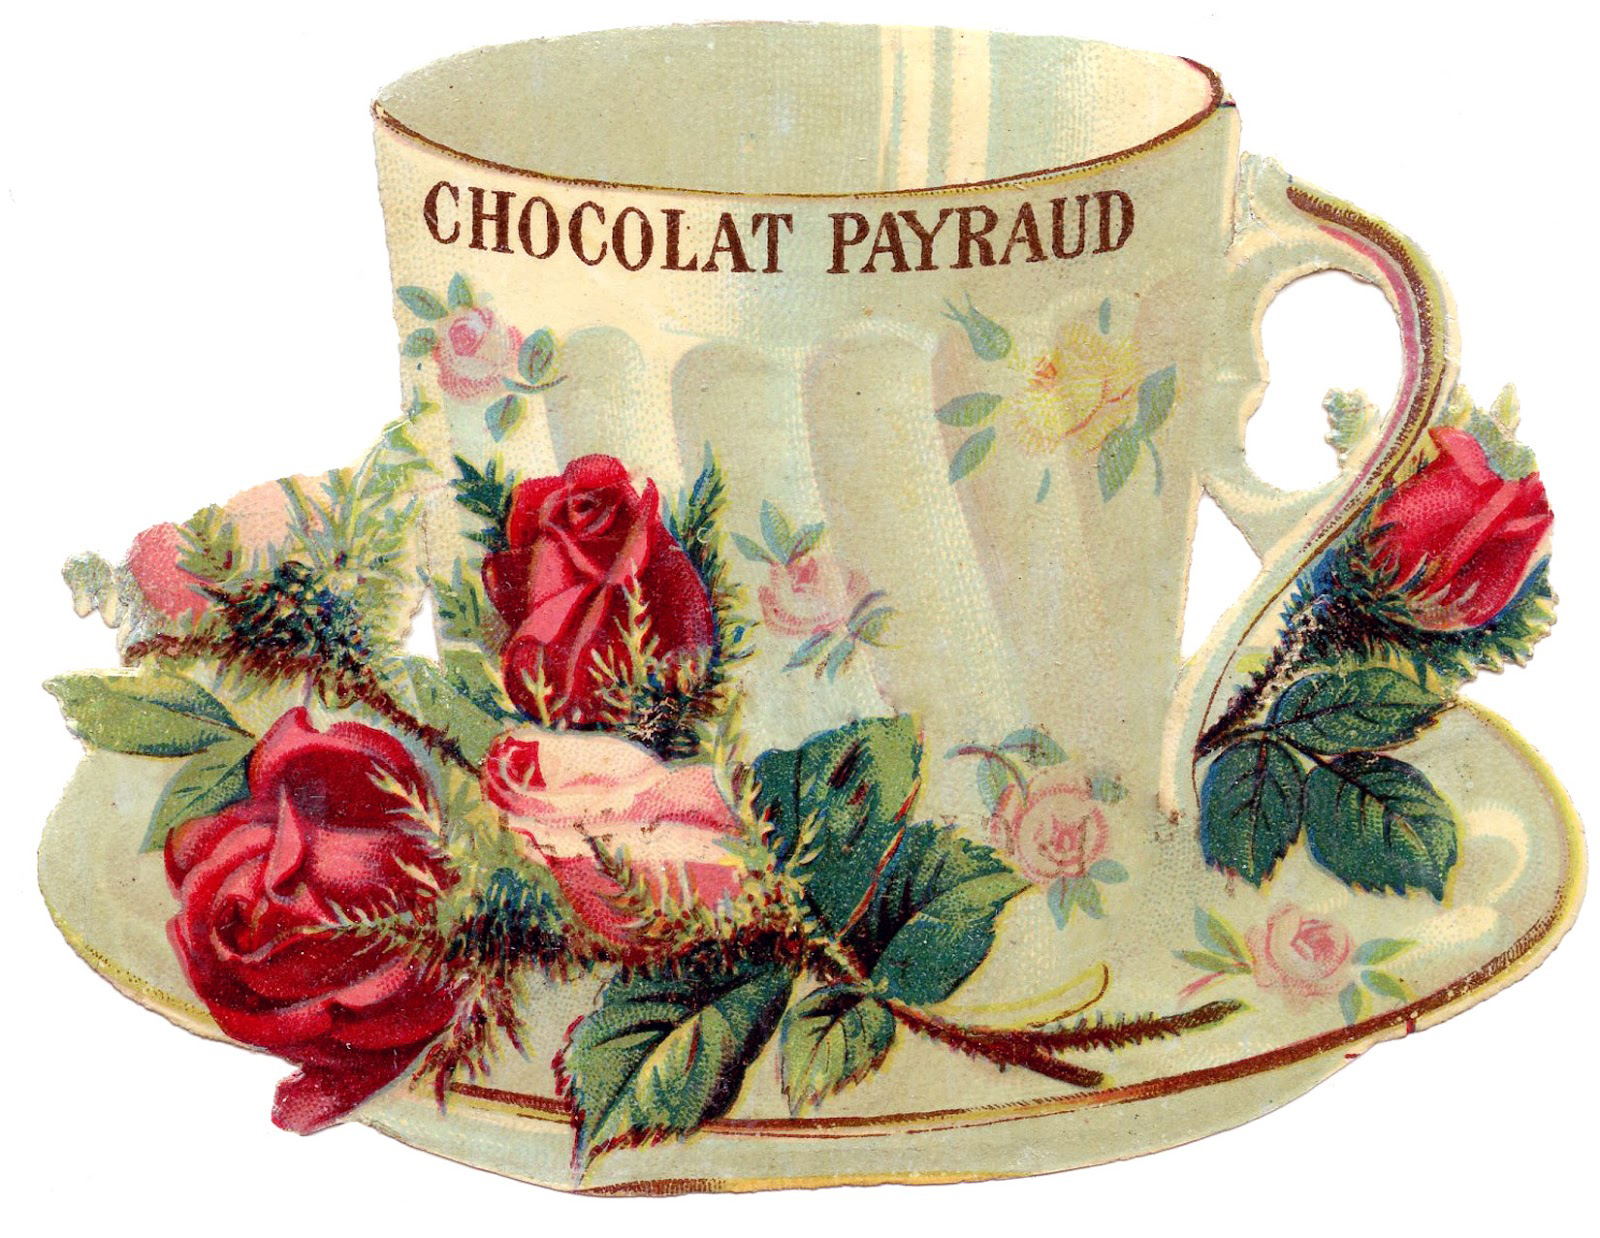 22 Pretty Teacups - Roses and more! - The Graphics Fairy